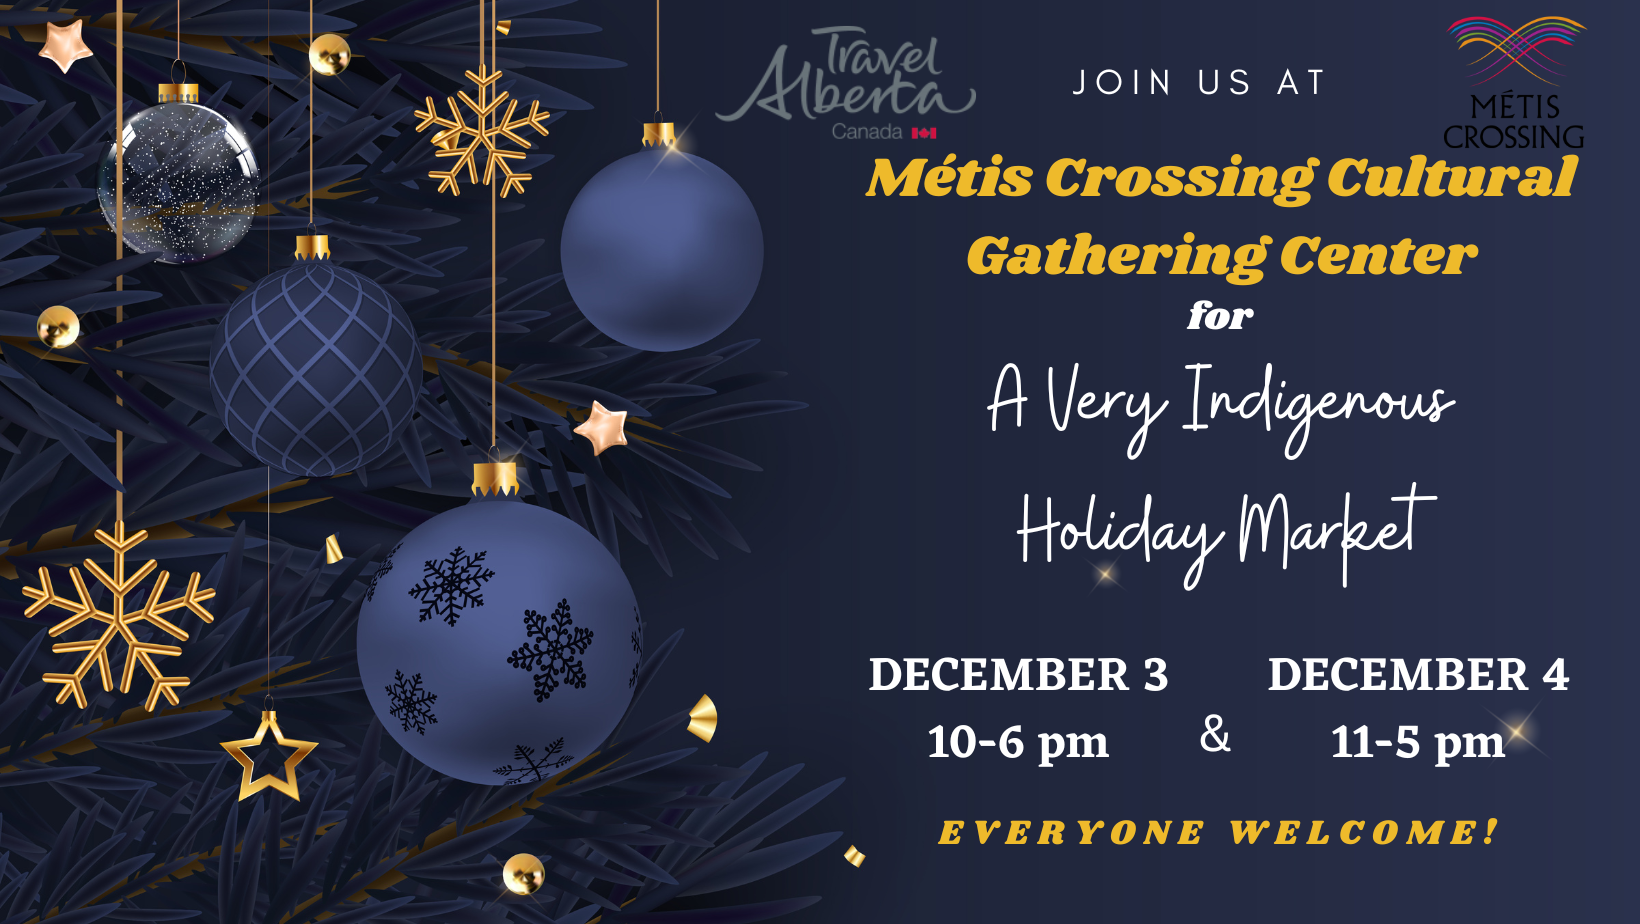 Featured image for “A Very Indigenous Holiday Market at Métis Crossing Cultural Gathering Center”